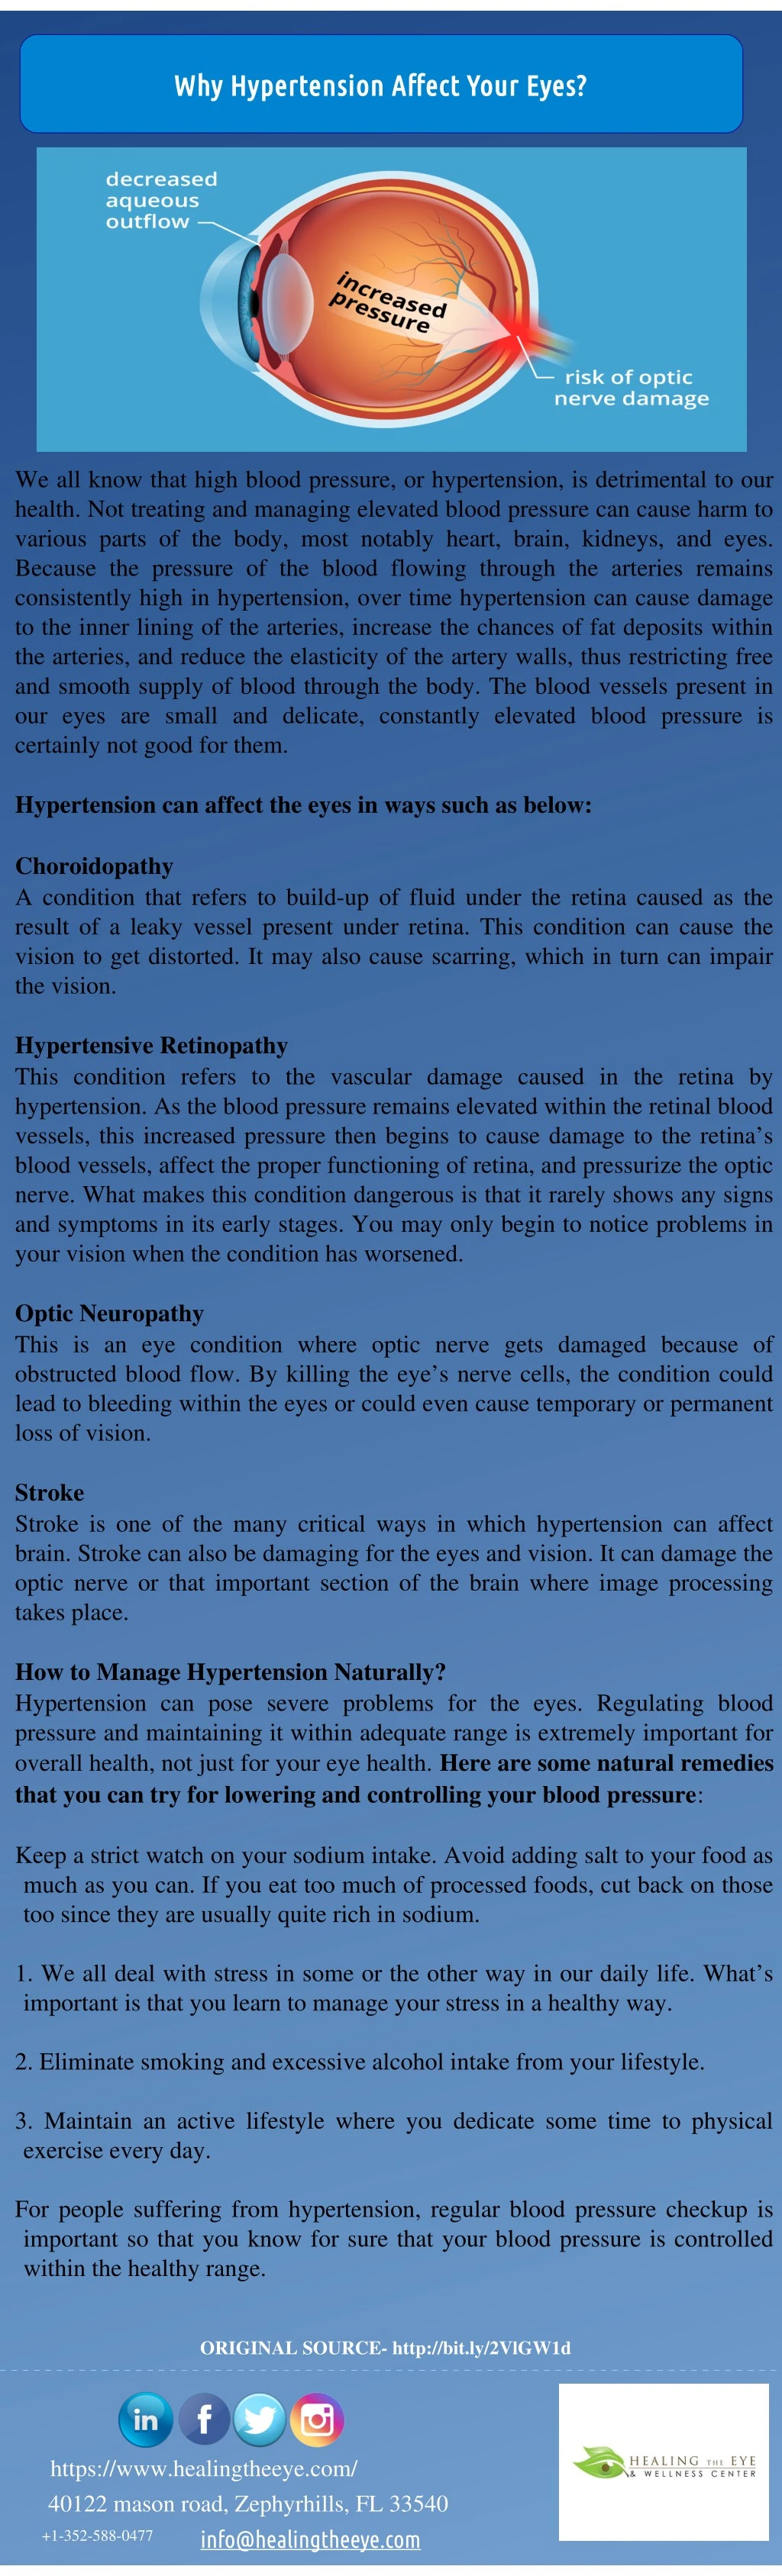 why hypertension affect your eyes